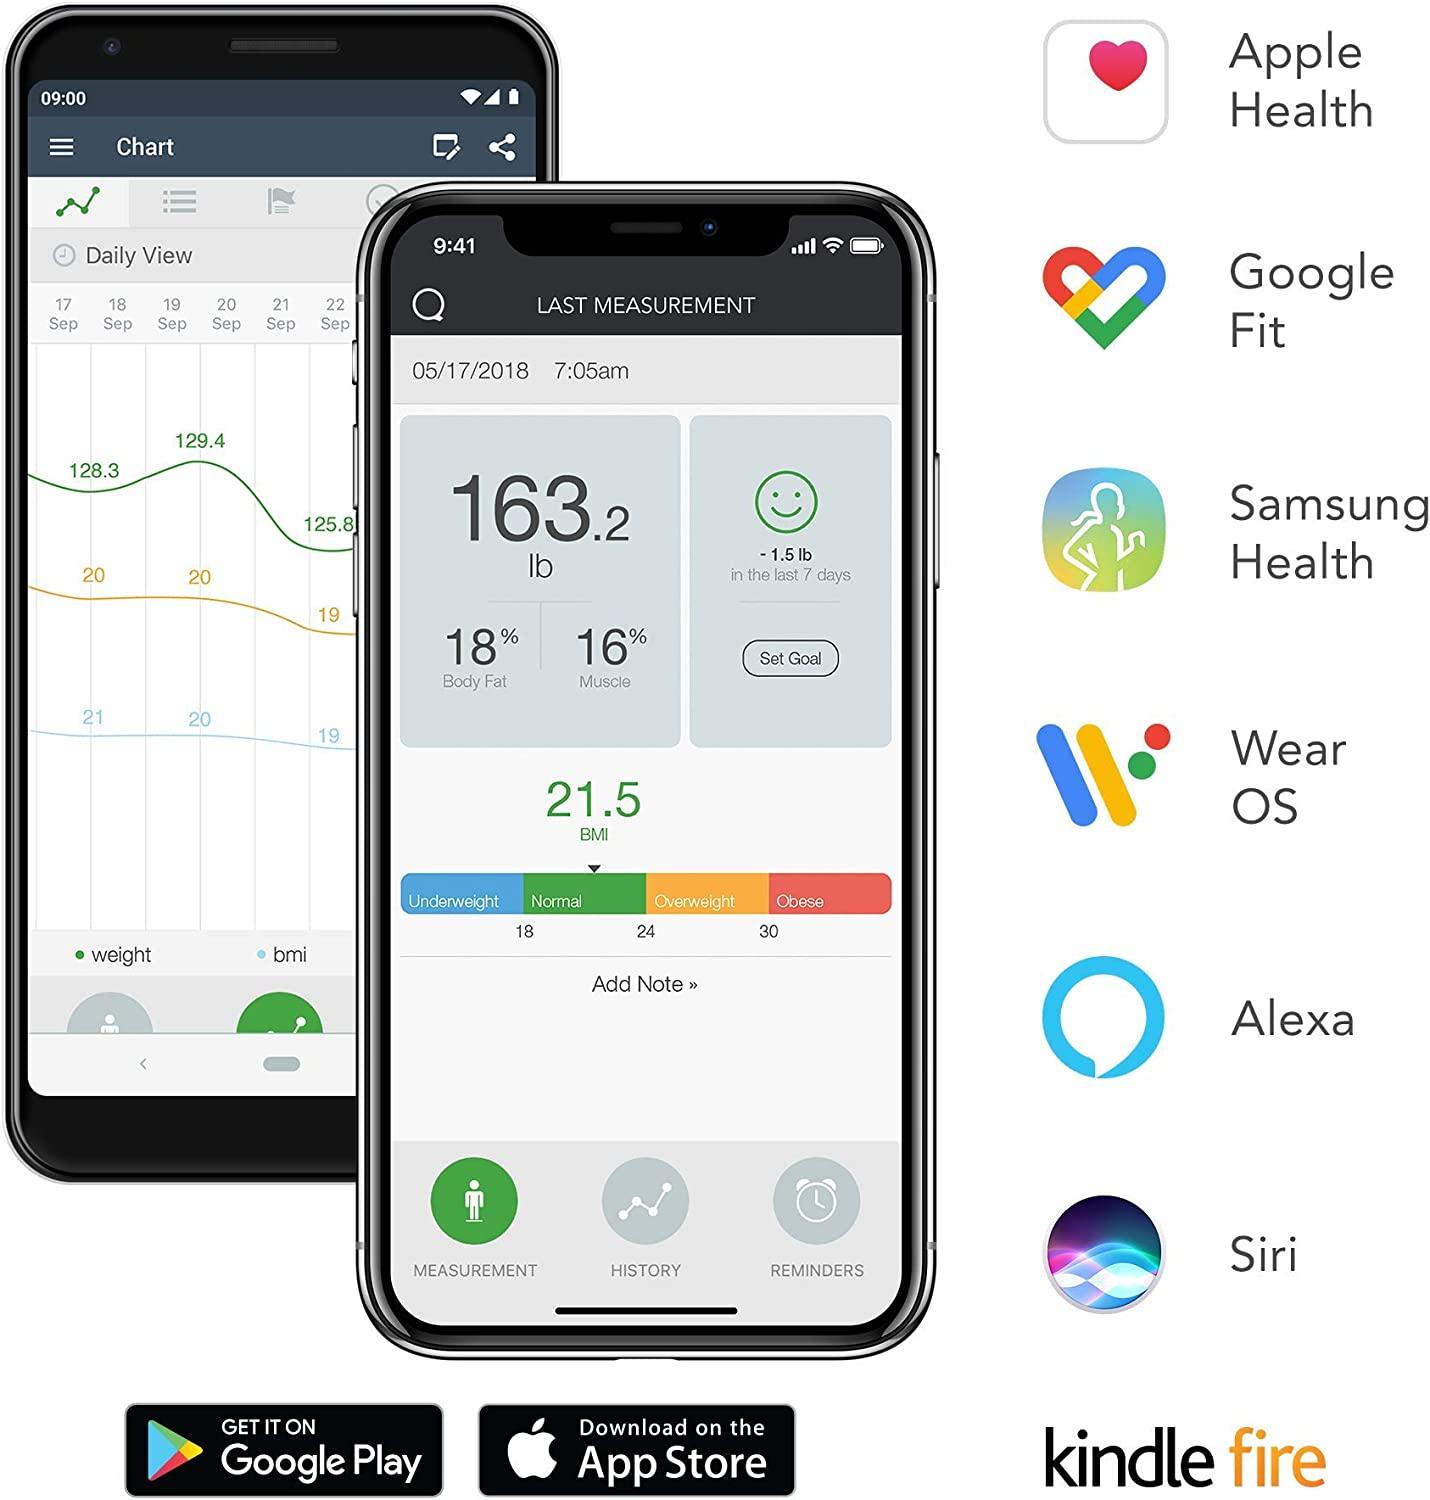  QardioBase X Smart WiFi Scale and Full Body Composition 12  Fitness Indicators Analyzer. App-Enabled for iOS, Android, iPad, Apple  Health. Athlete, Pregnancy and Multi-User Modes. : Health & Household